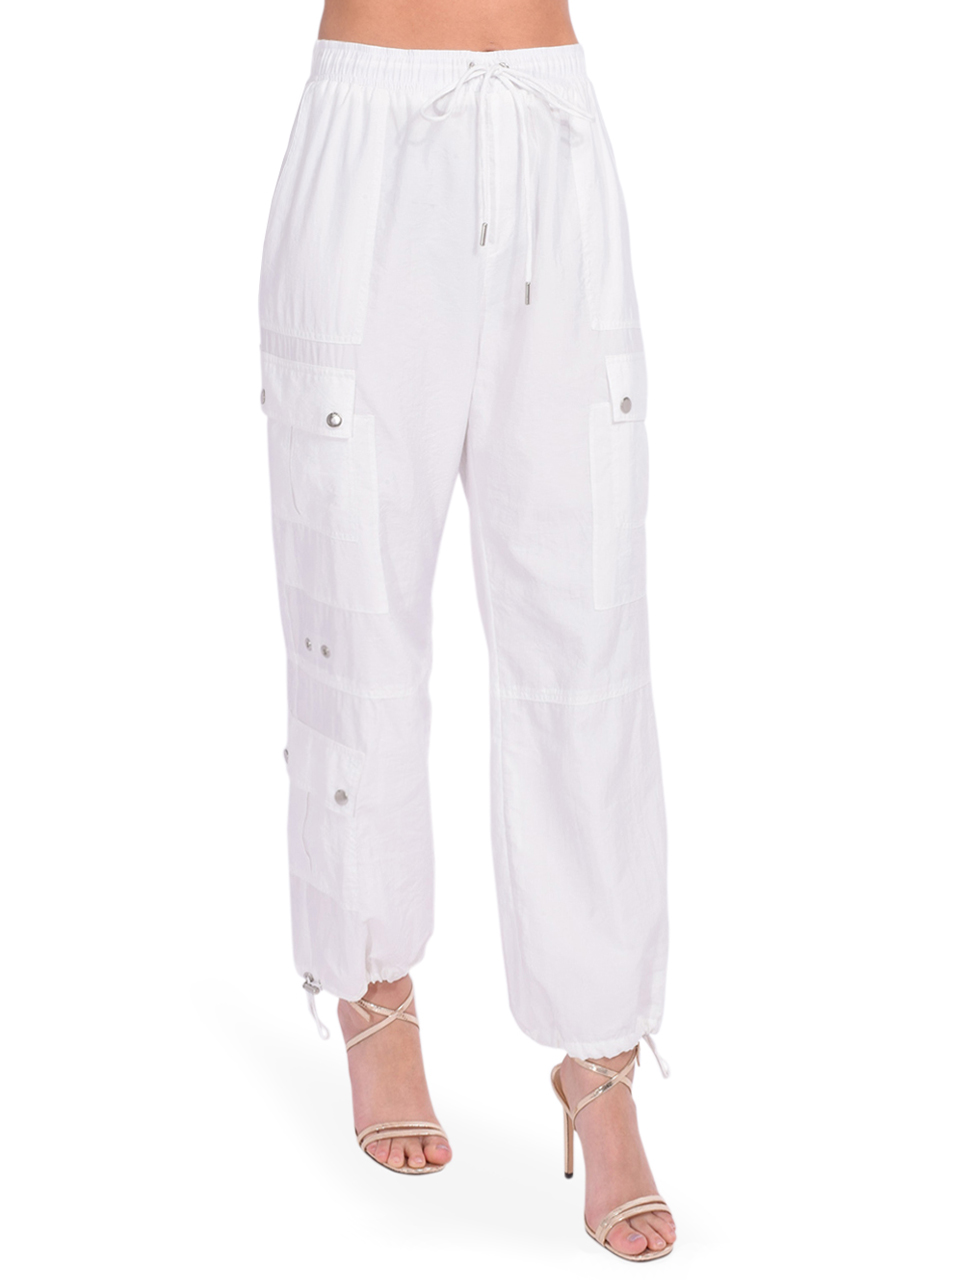 Cinq a Sept Nitsan Parachute Pant in White Side View 

